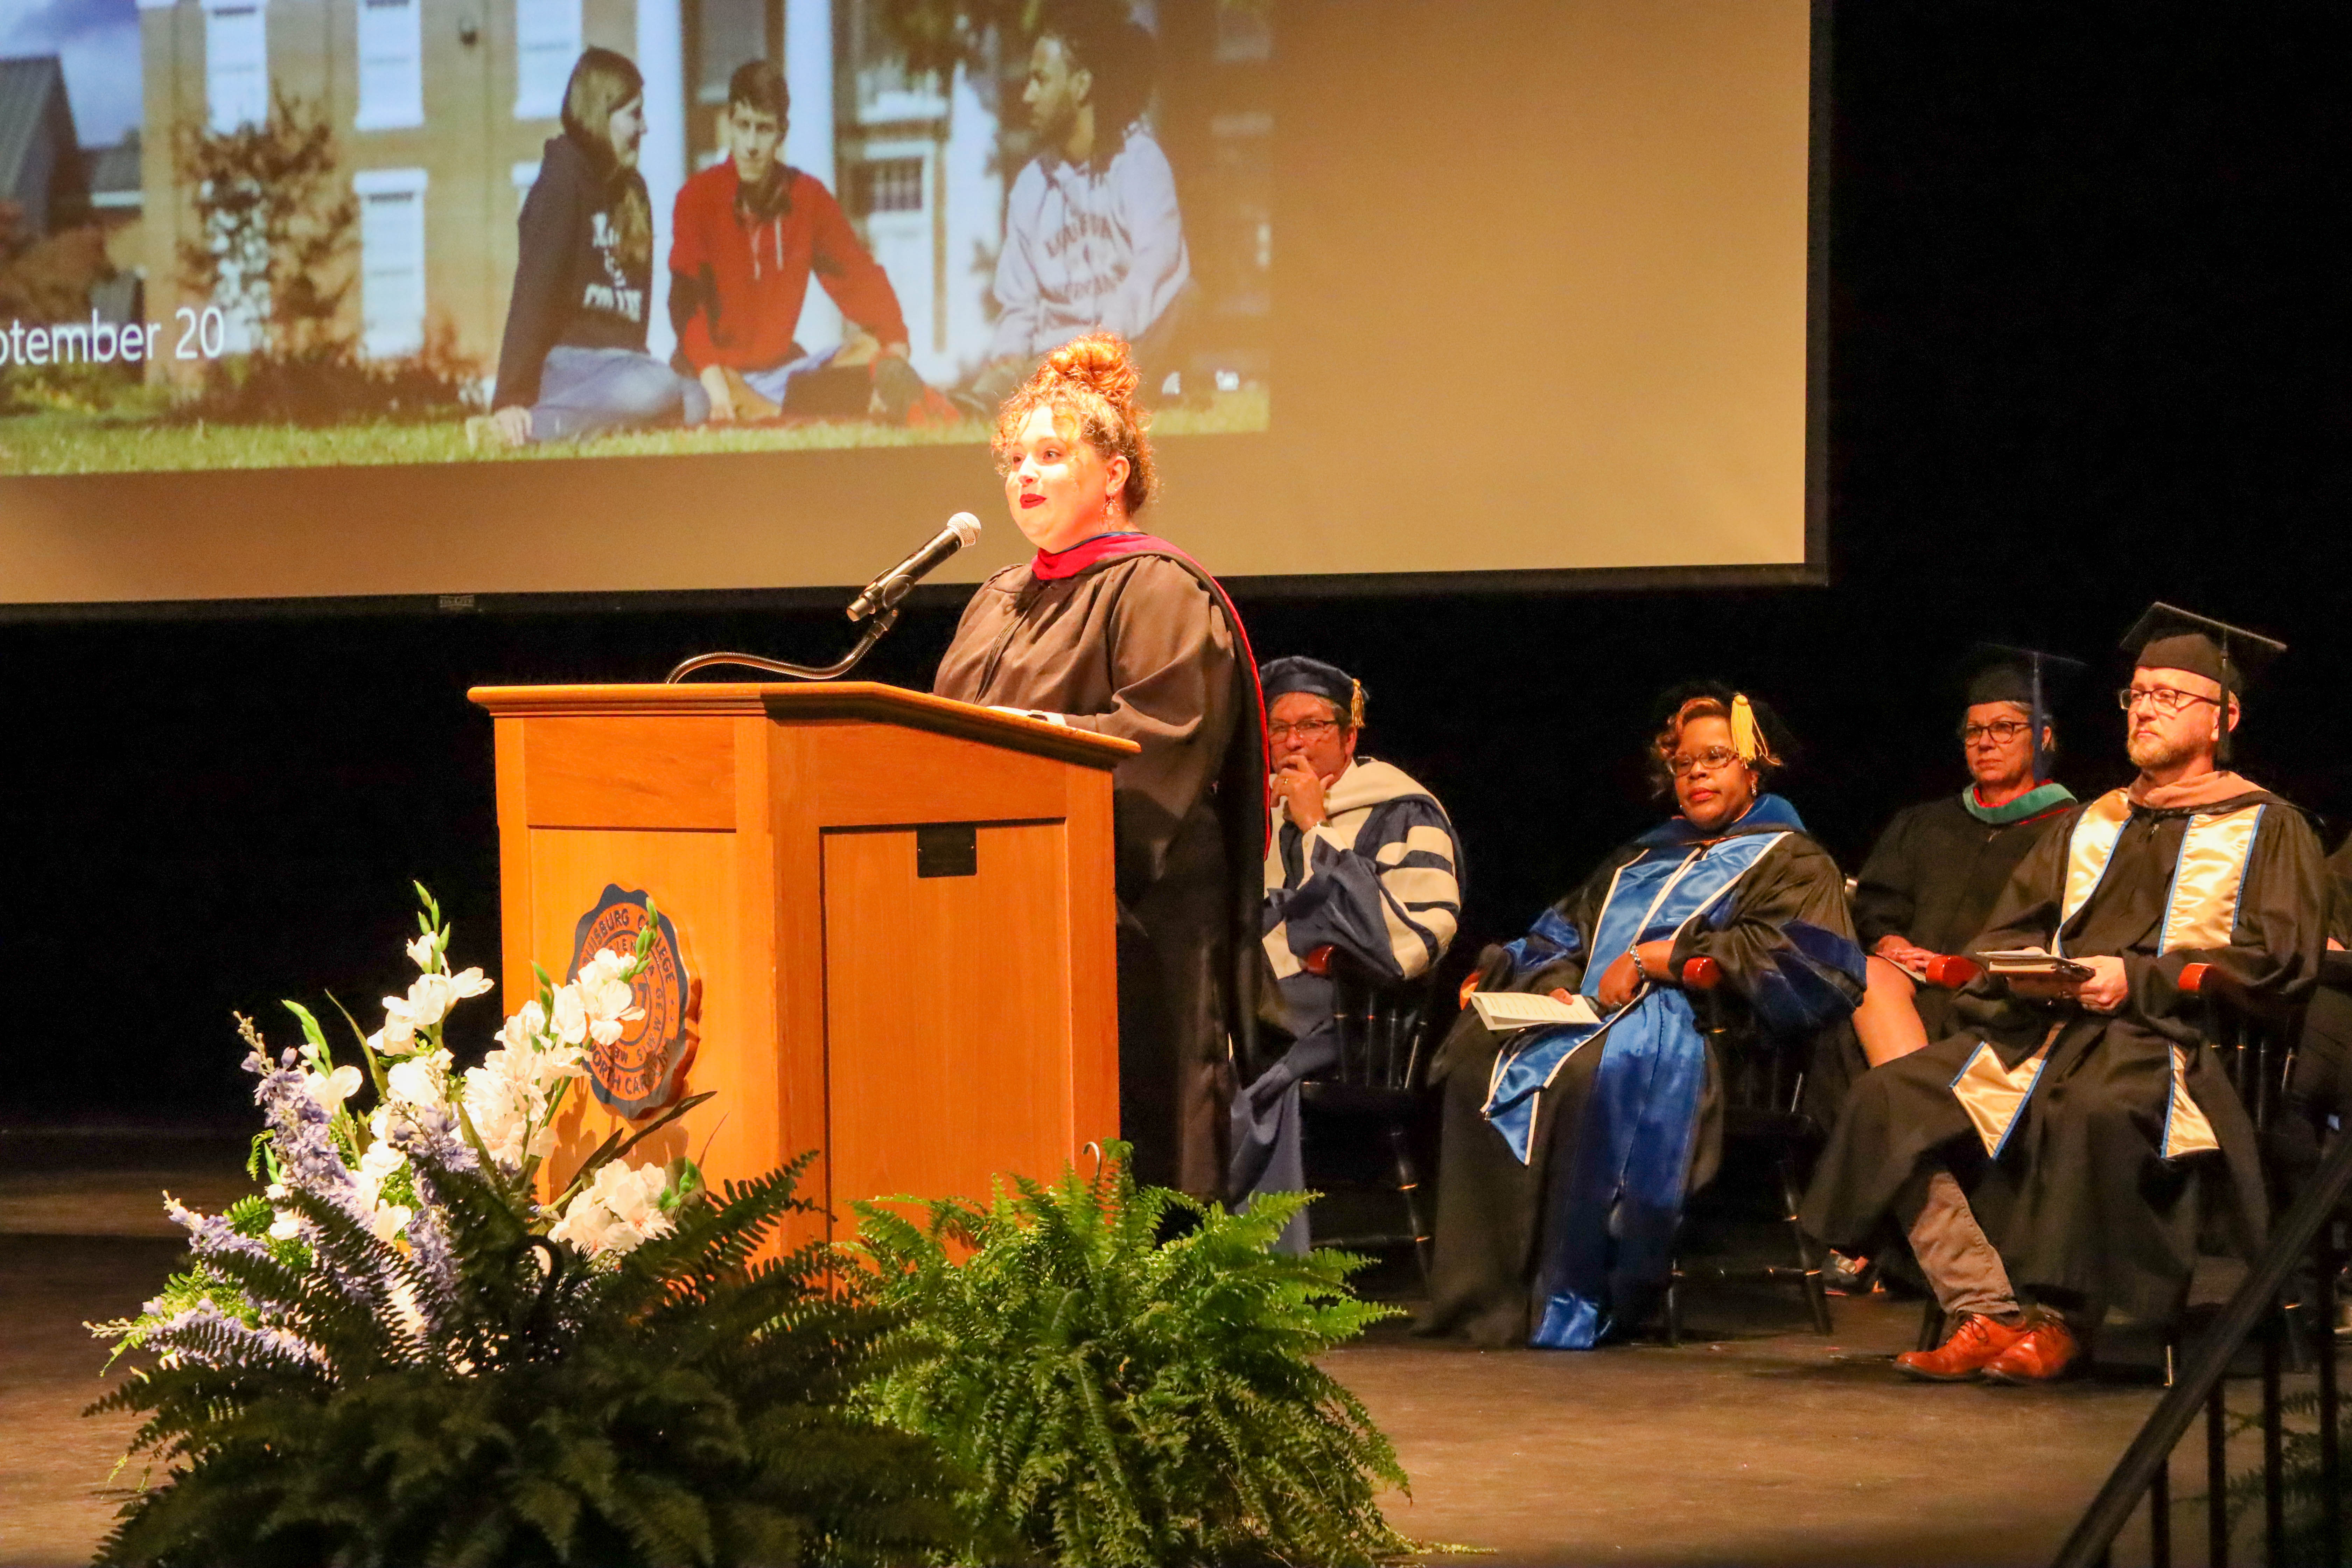 Students, faculty, and staff attended the Fall 2022 Convocation, Thrive in the Present and Embrace the Future, Tuesday, September 20, 2022. The ceremony was held in the Jones Performing Arts Center and the convocation address was delivered by Reverend Amanda Bruce, Chaplain, Louisburg College.